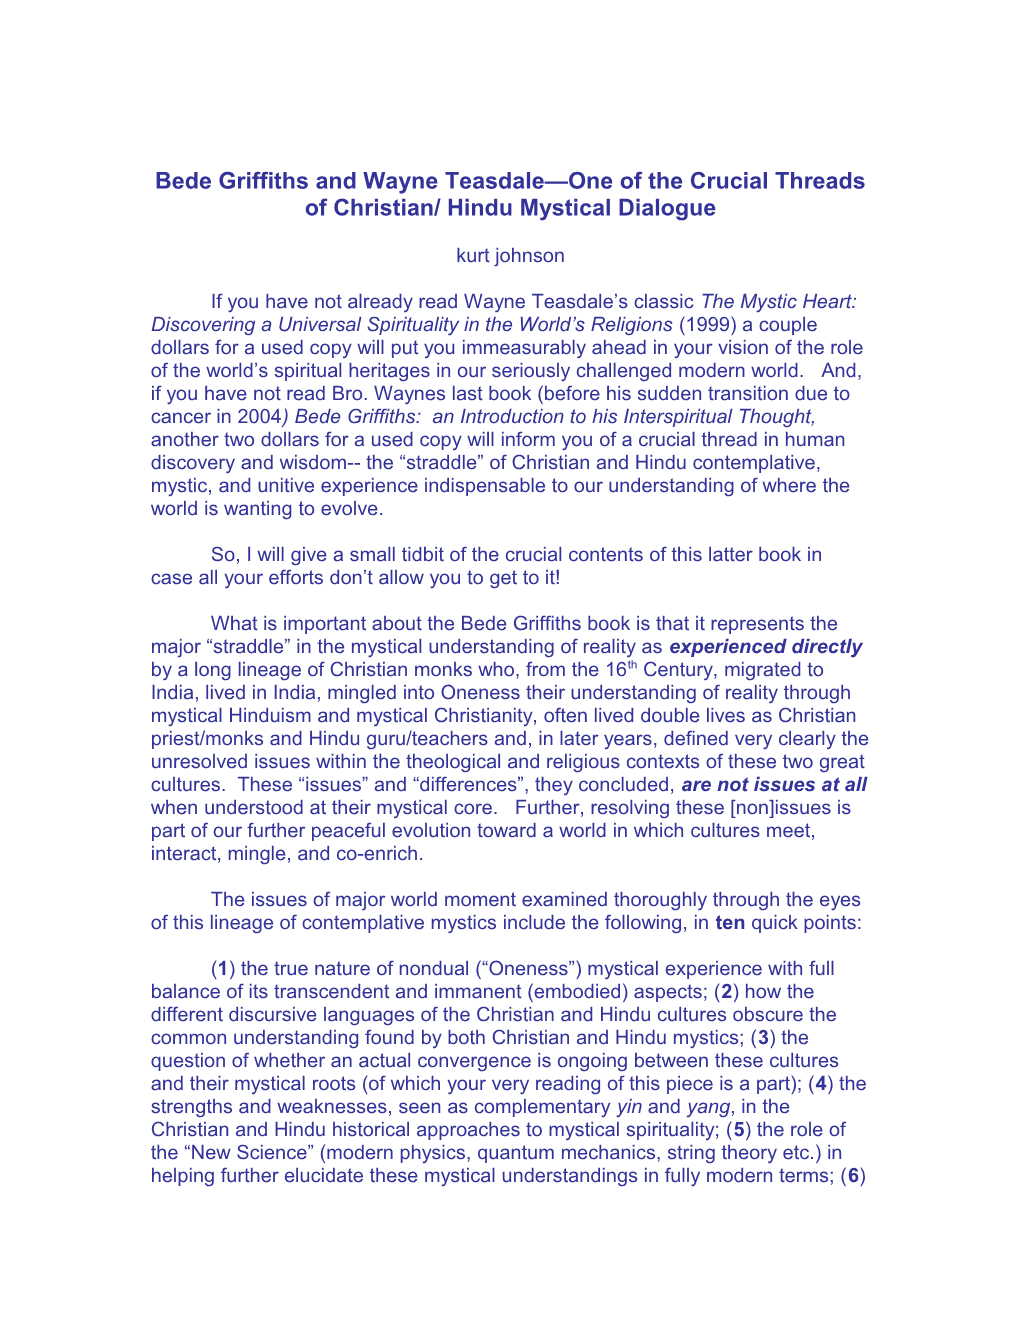 Bede Griffiths and Wayne Teasdale One of the Crucial Threads of Christian/ Hindu Mystical